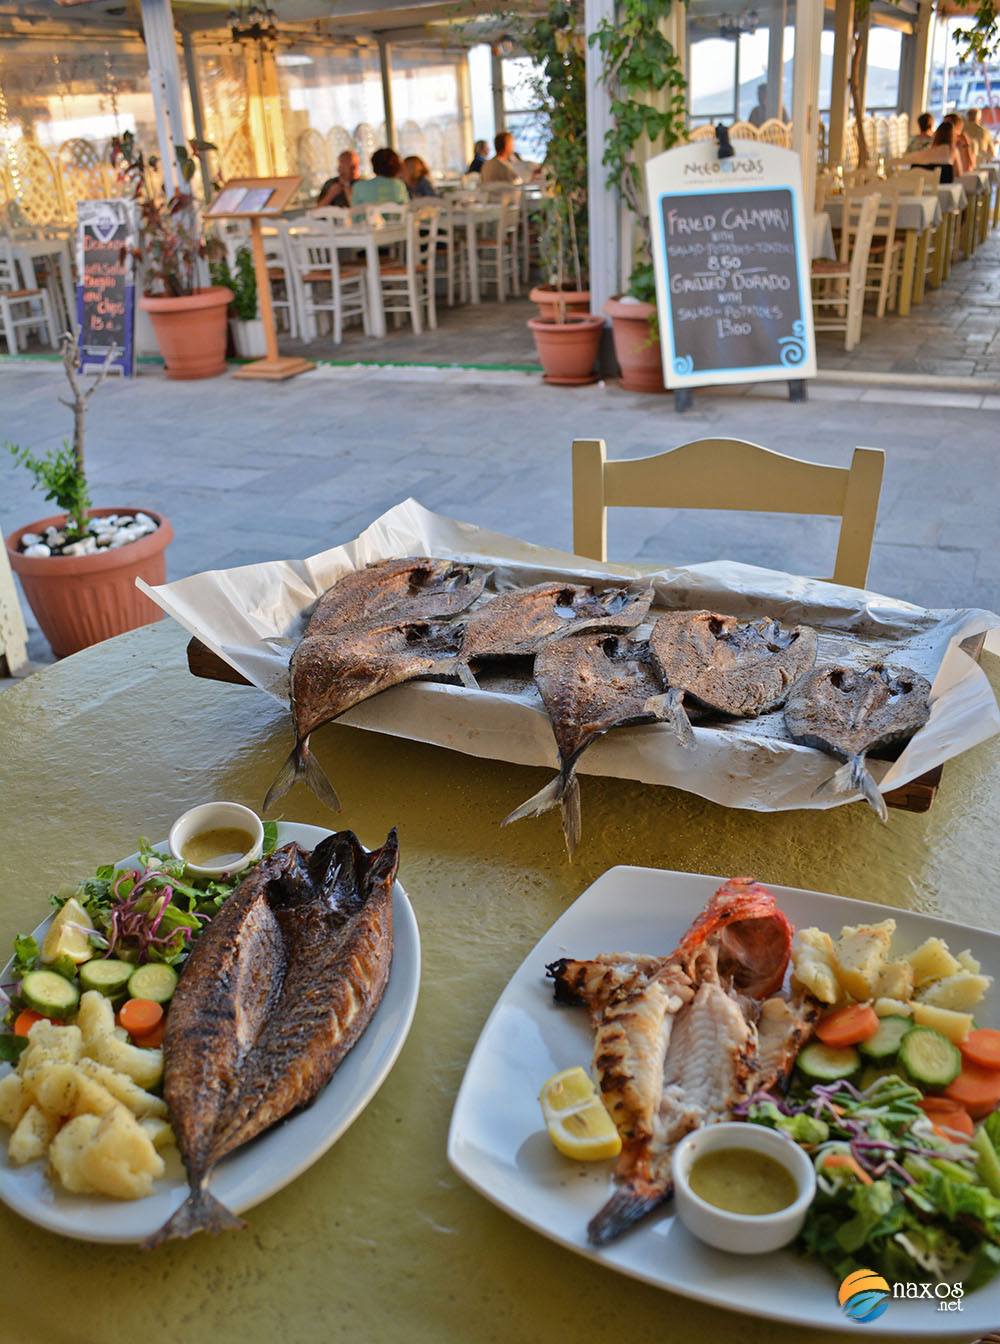 Restaurants of Naxos with excellent local cuisine